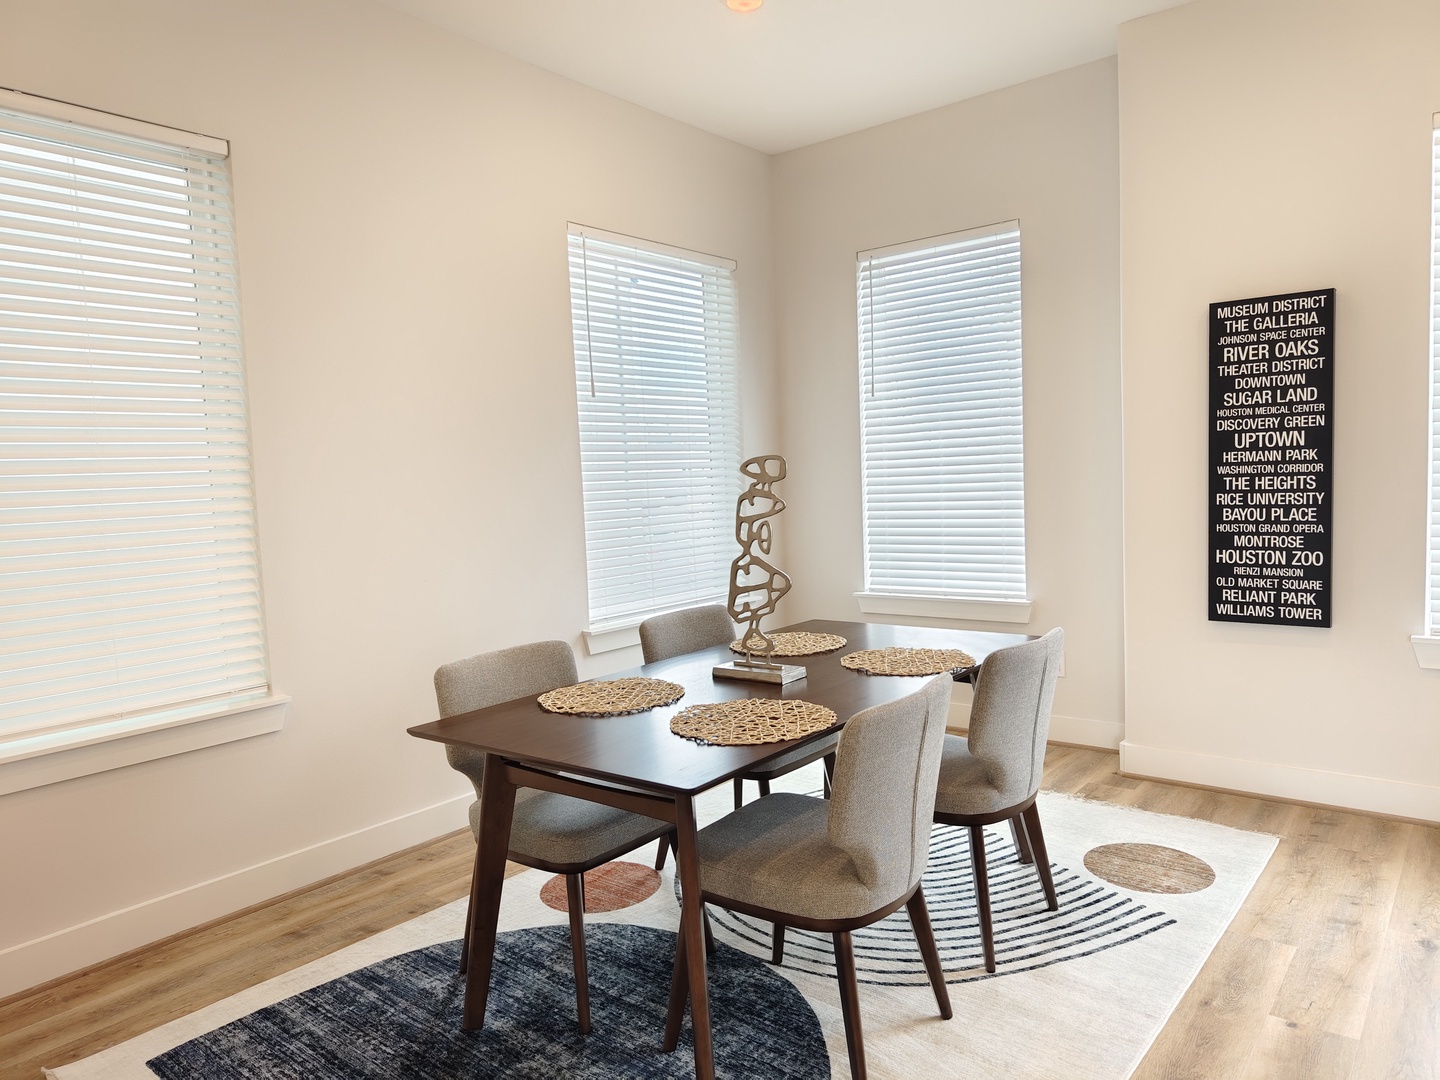 Dine in style together at the dining table, with seating for 4